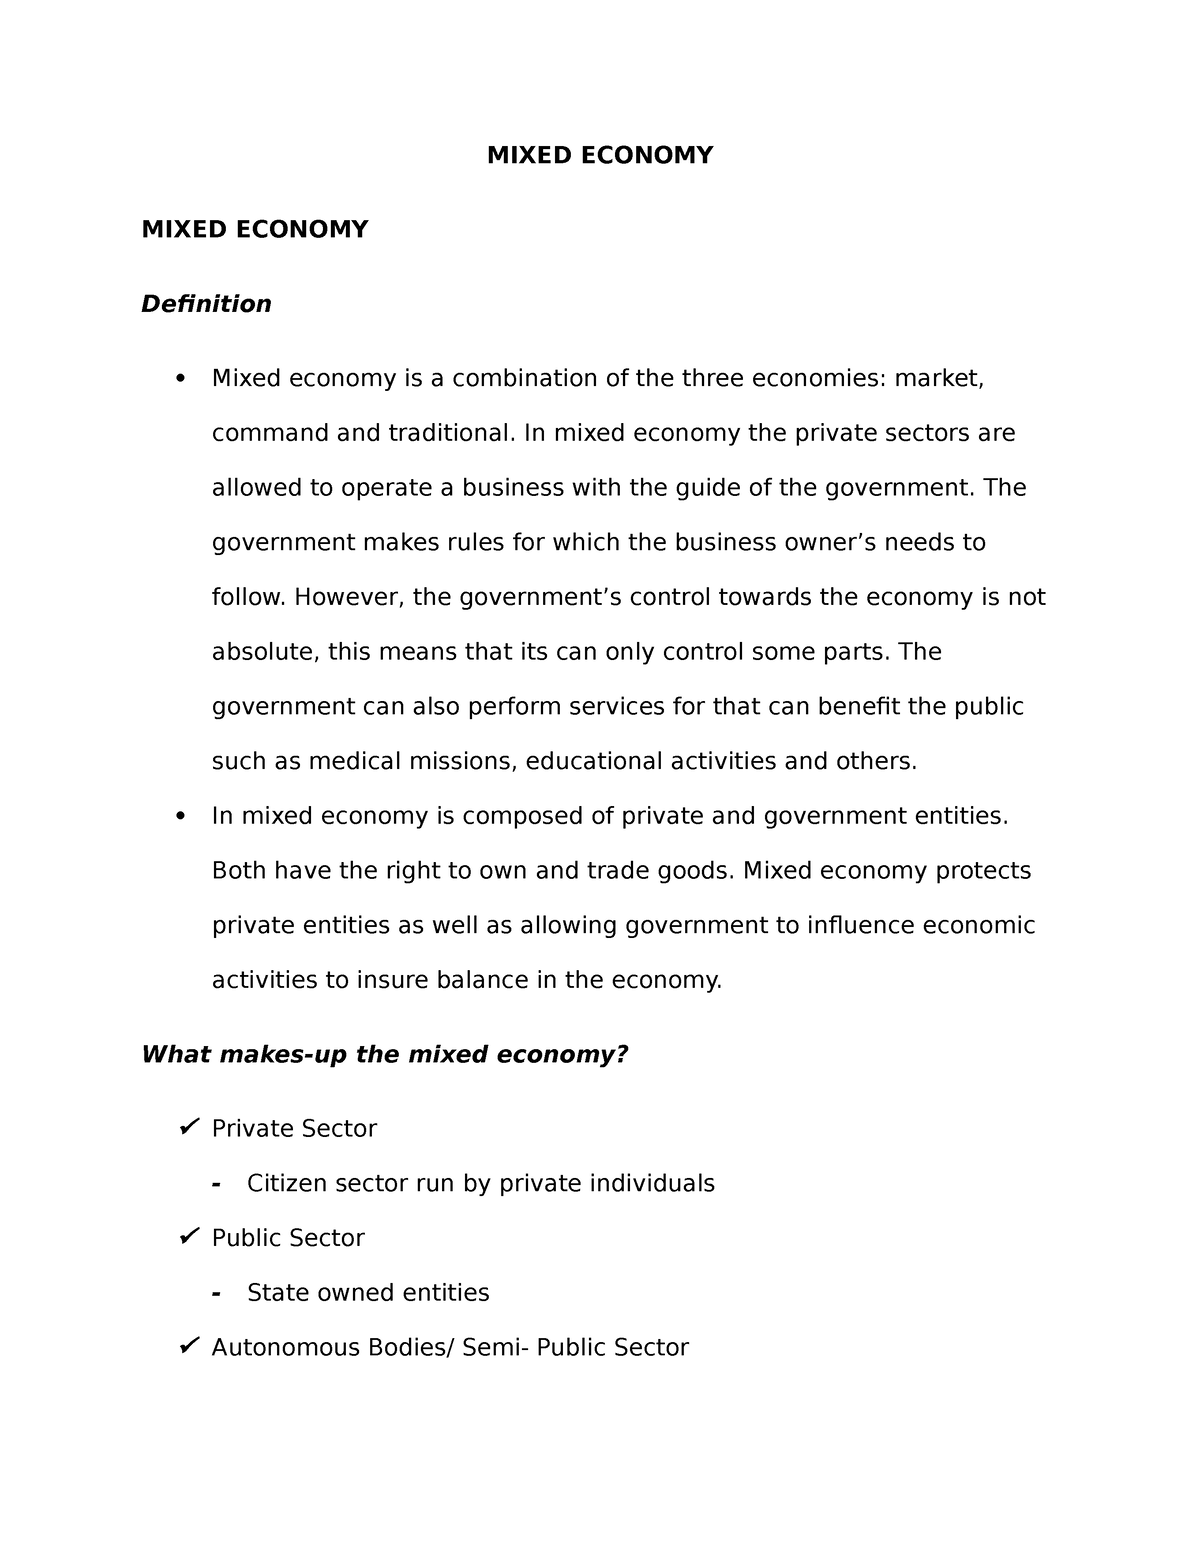 south africa's mixed economy essay